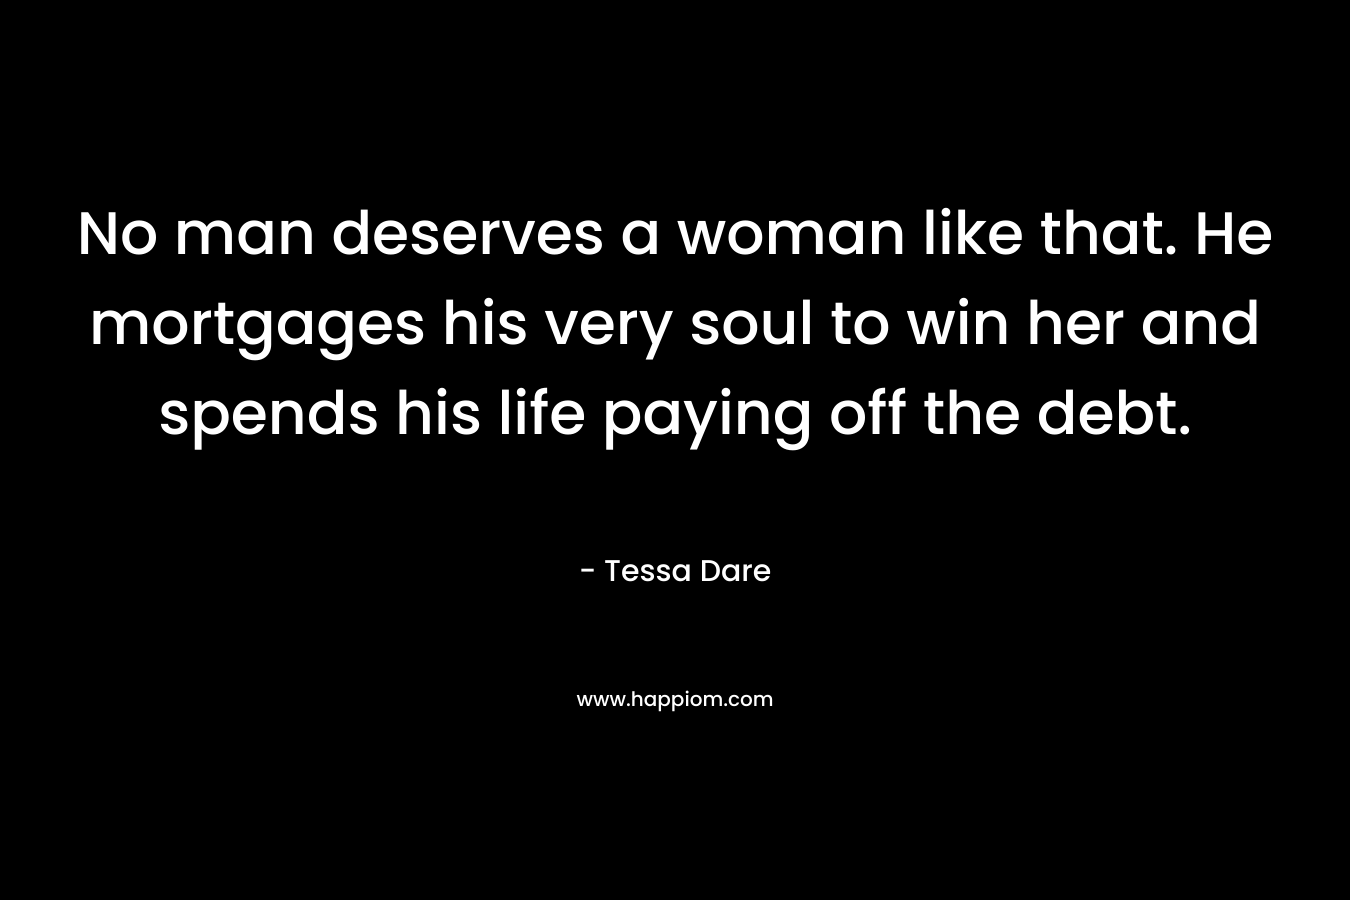 No man deserves a woman like that. He mortgages his very soul to win her and spends his life paying off the debt. – Tessa Dare